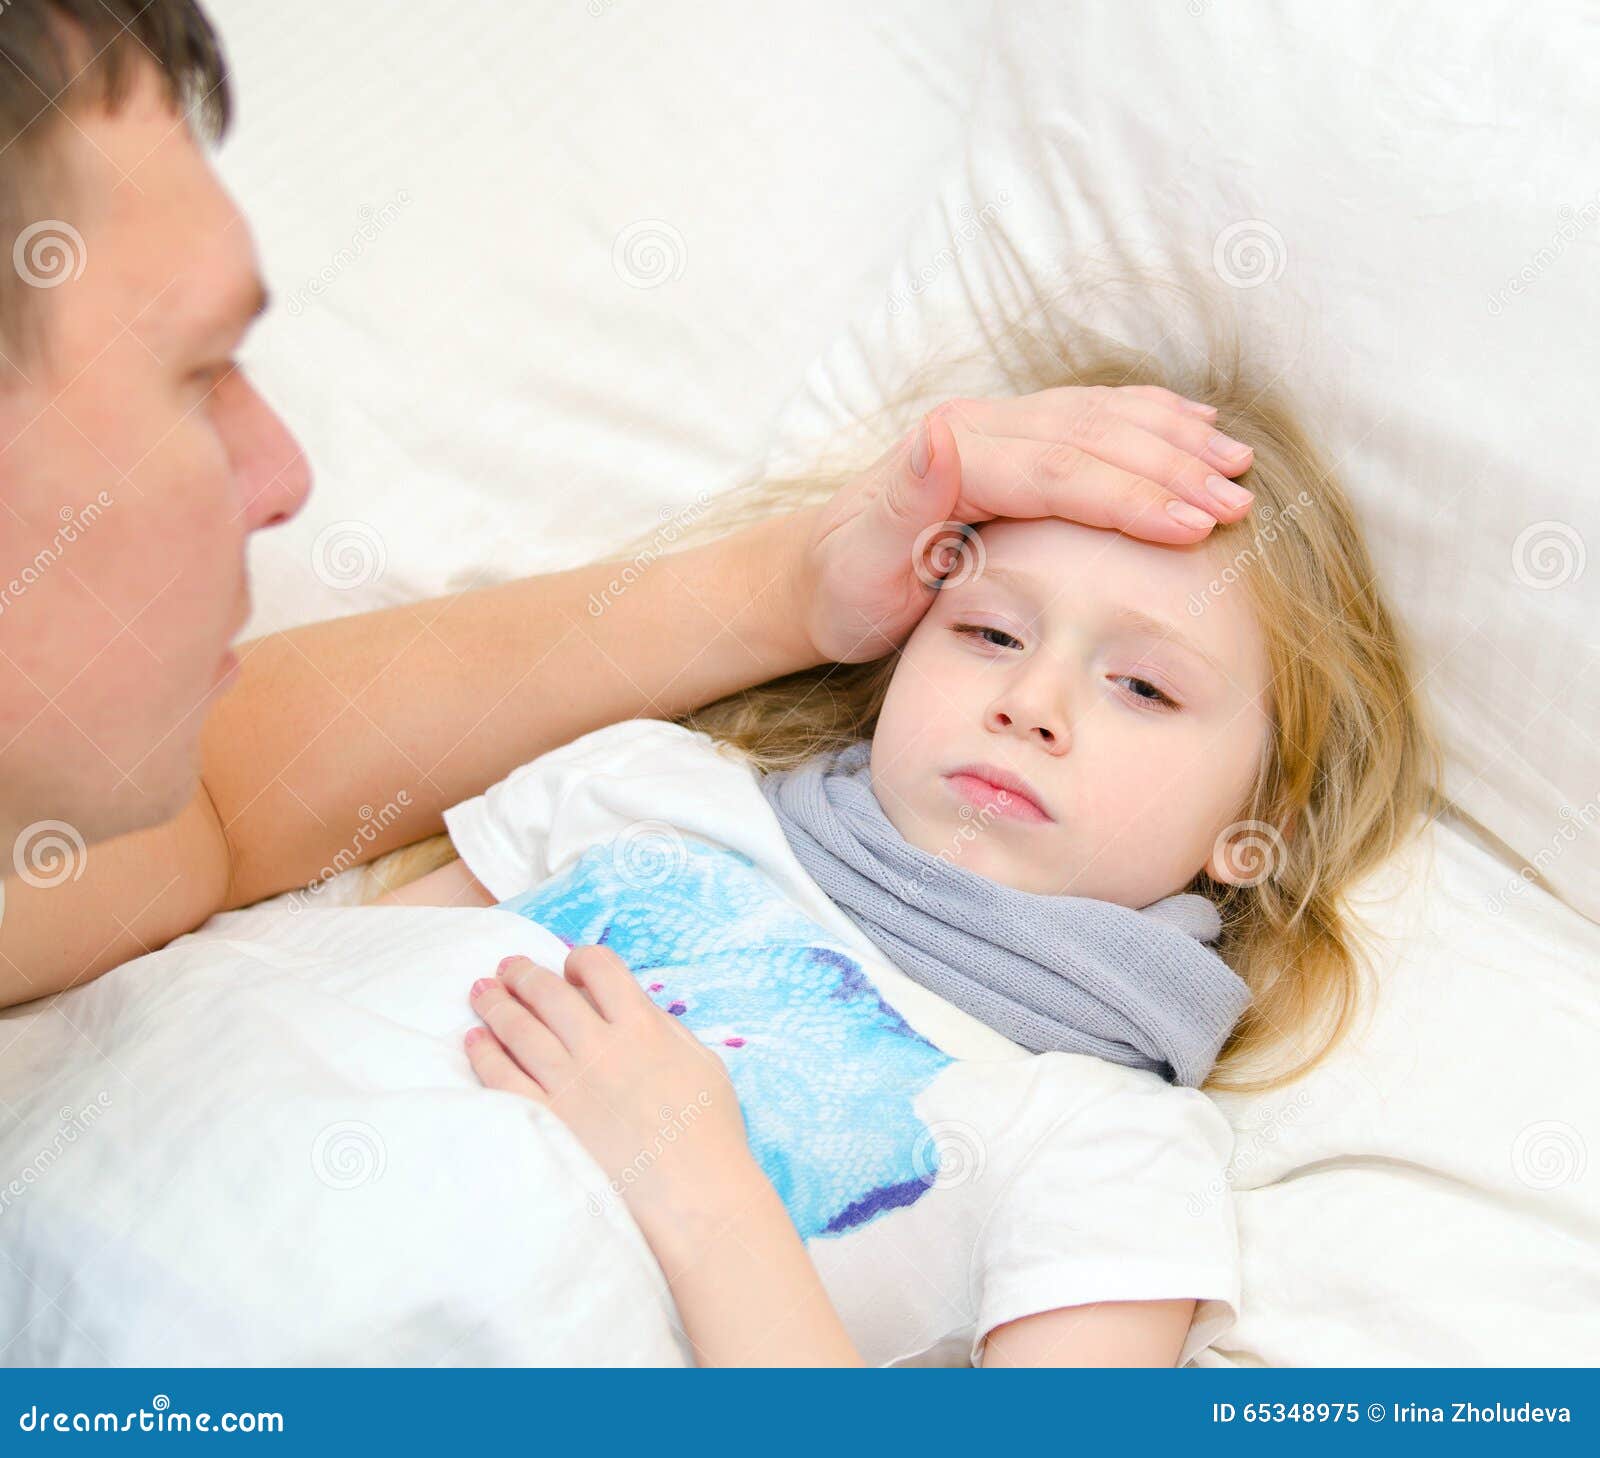 Father Checks Temperature Of Sick Daugher With His Hand Stock Image 